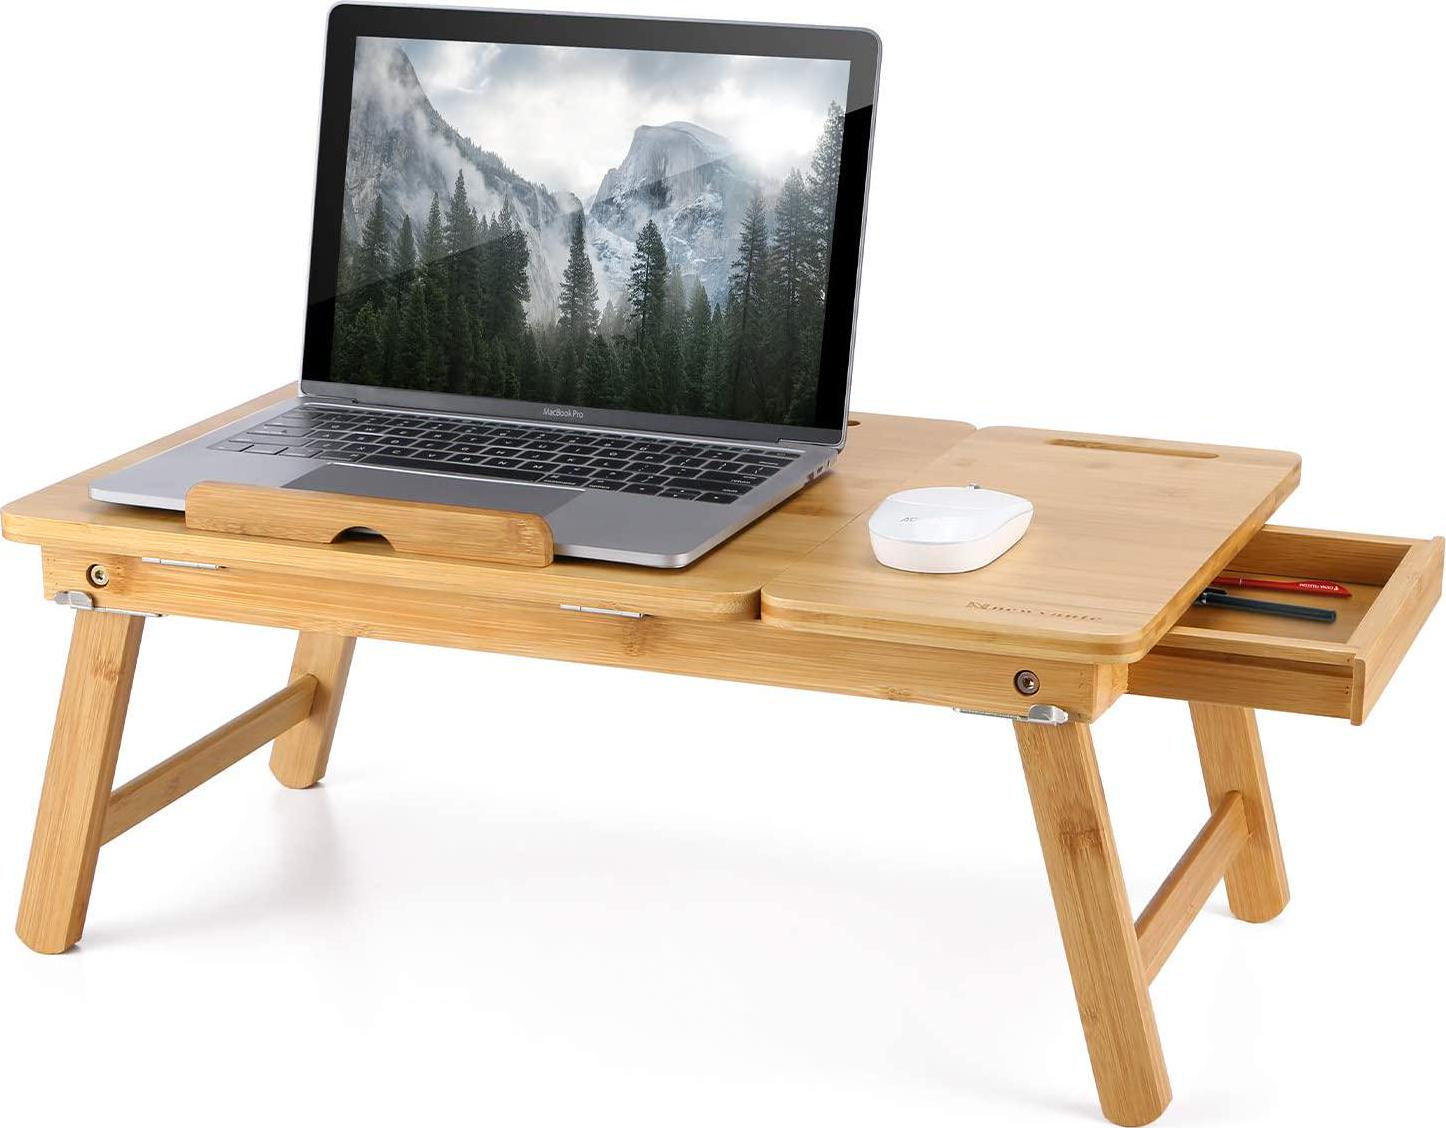 newvante, Laptop Desk Newvante Bed Tray Table Foldable Lap Desk Bamboo Breakfast Serving Tray w' Tilting Top Drawer Tablet Slots